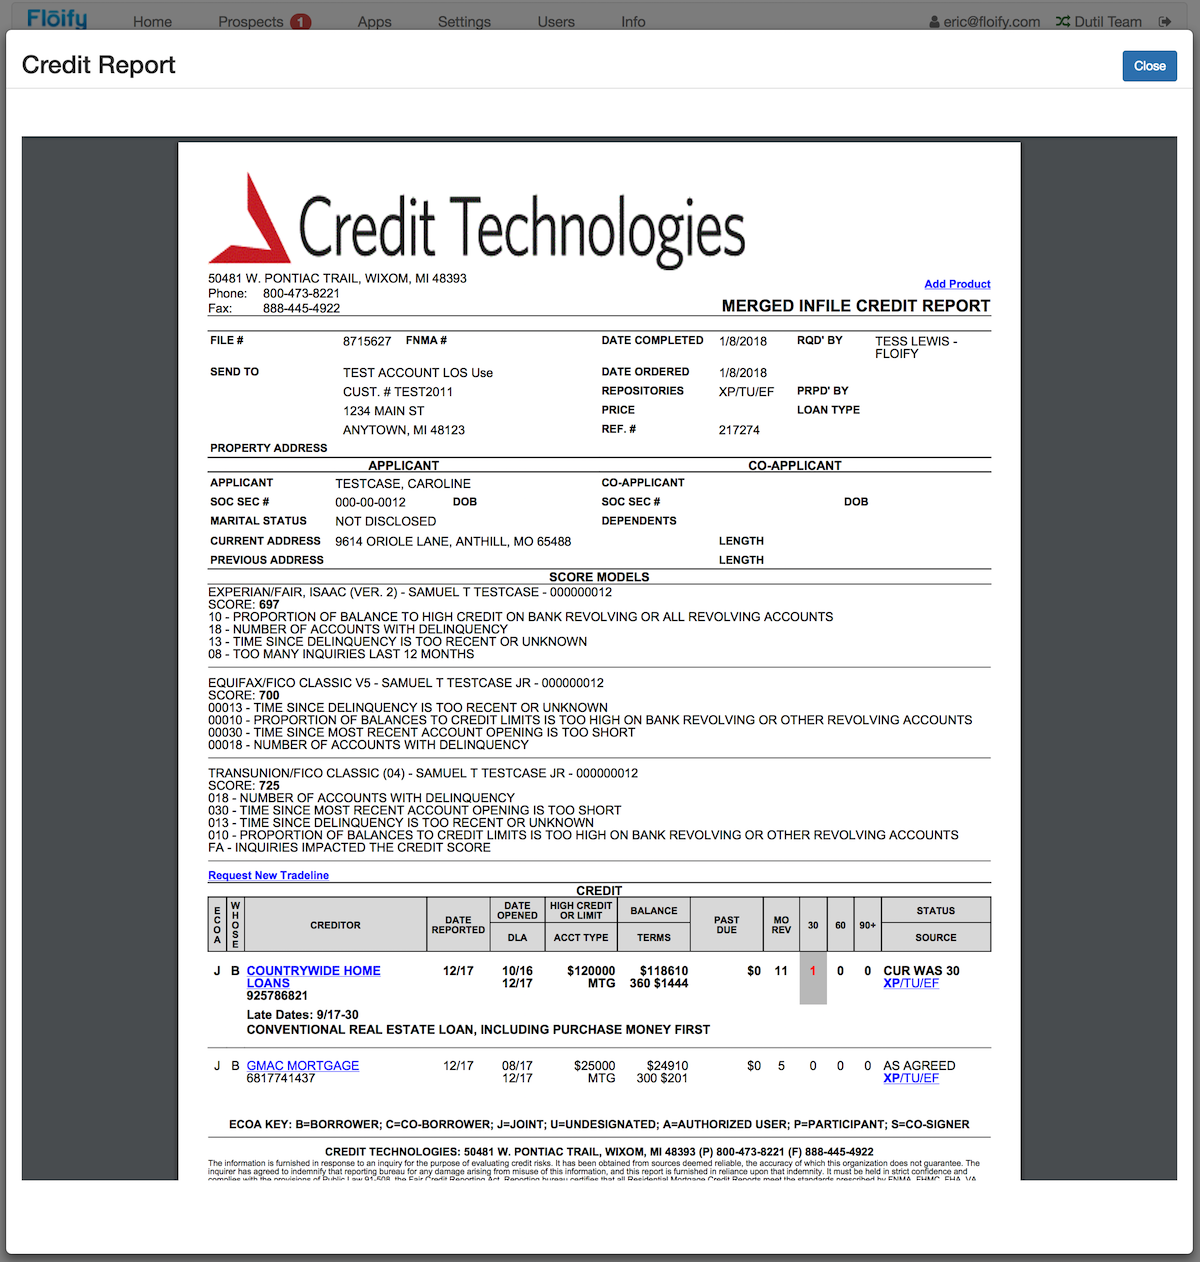 Credit_Technologies_report.png